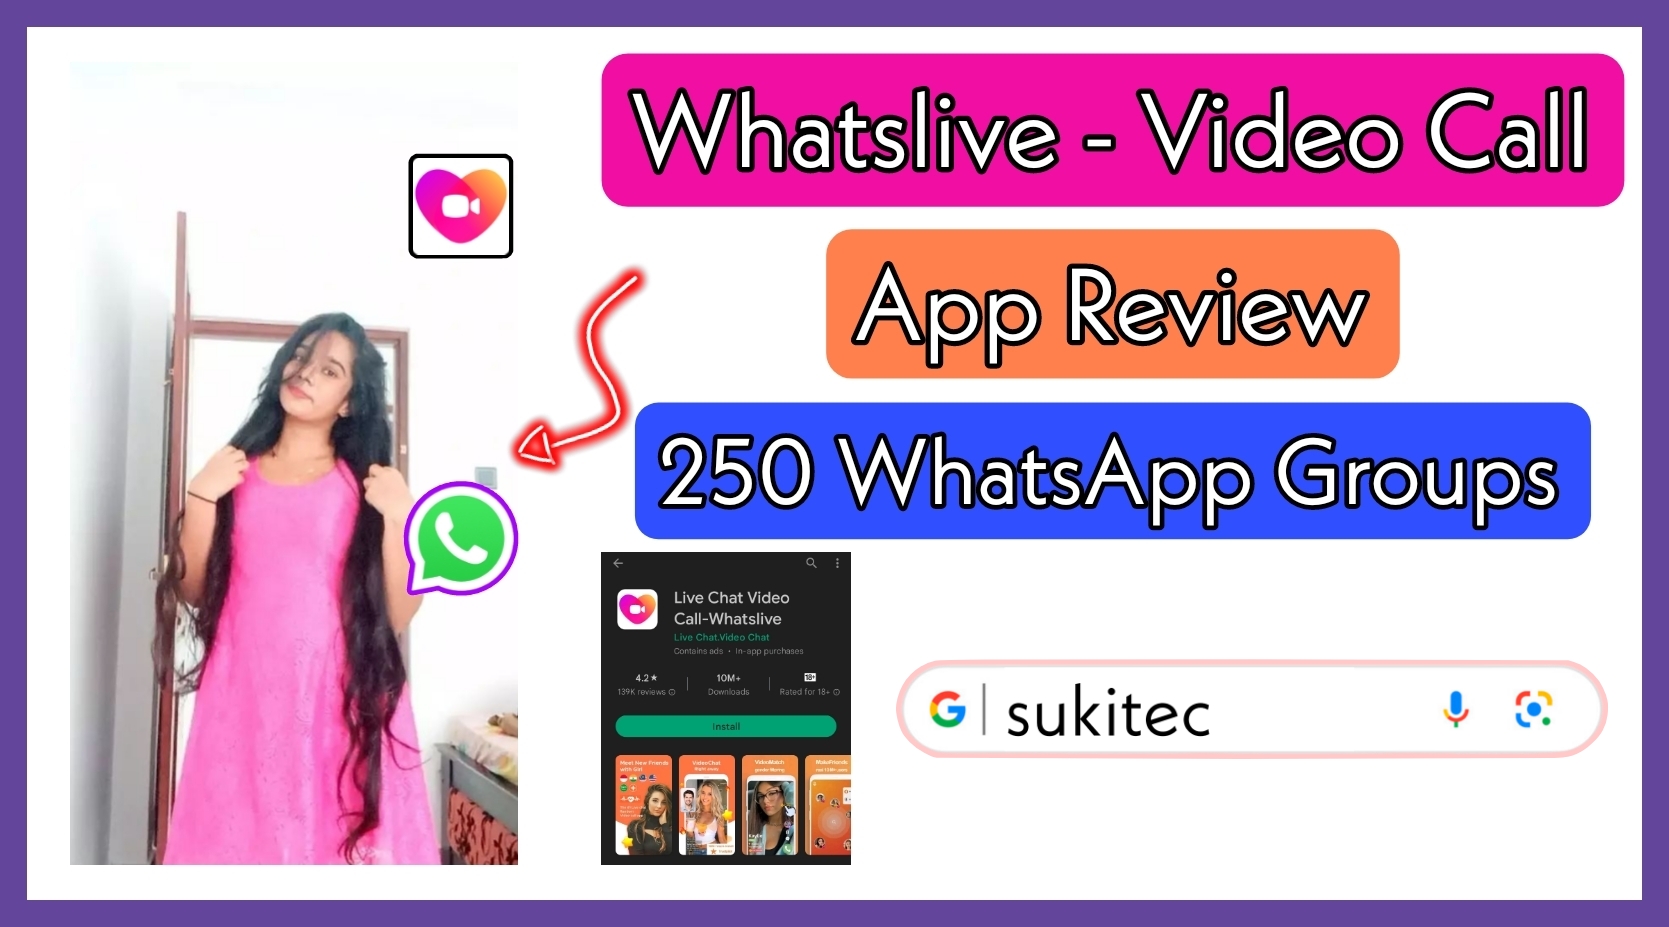 Live Chat Video Call-Whatslive App Review  – Yooye77